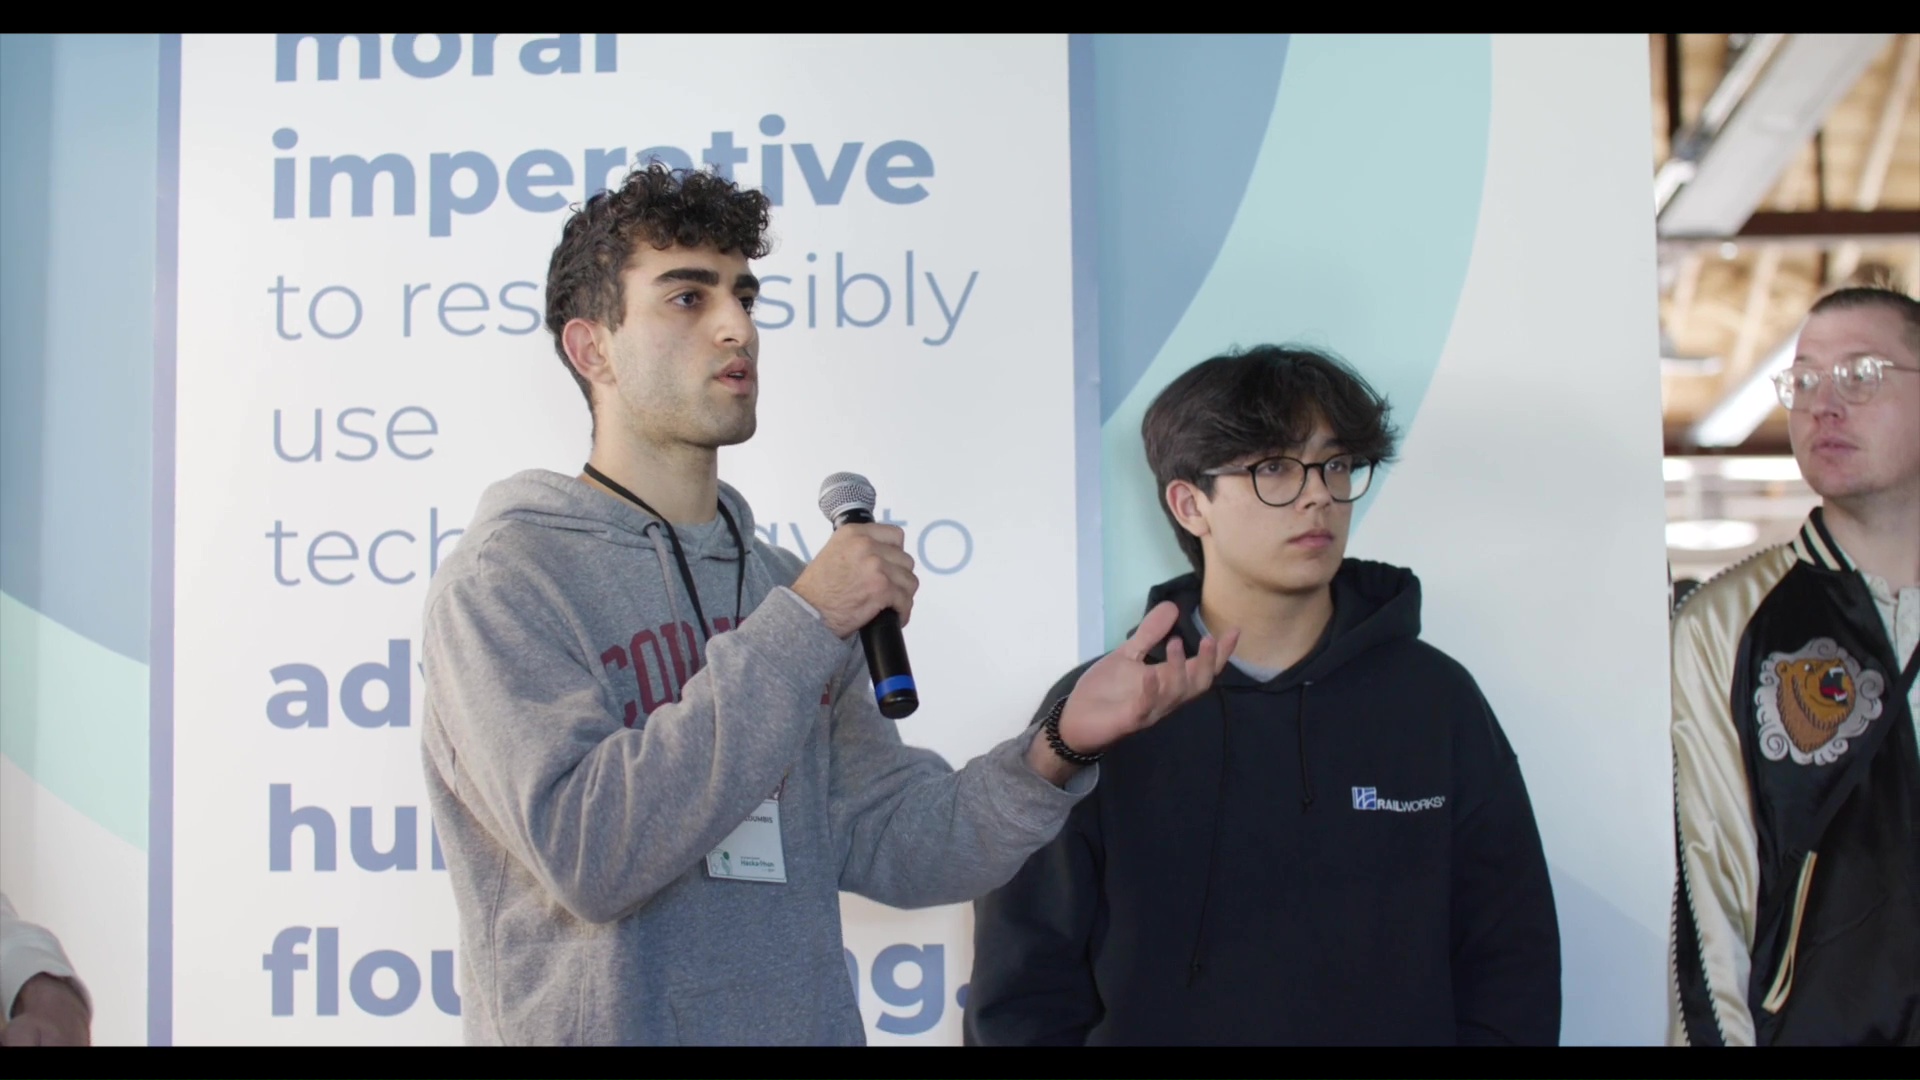 AI seems to be everywhere, including the church. Gloo recently sponsored an AI “hackathon” to bring together like-minded software designers.